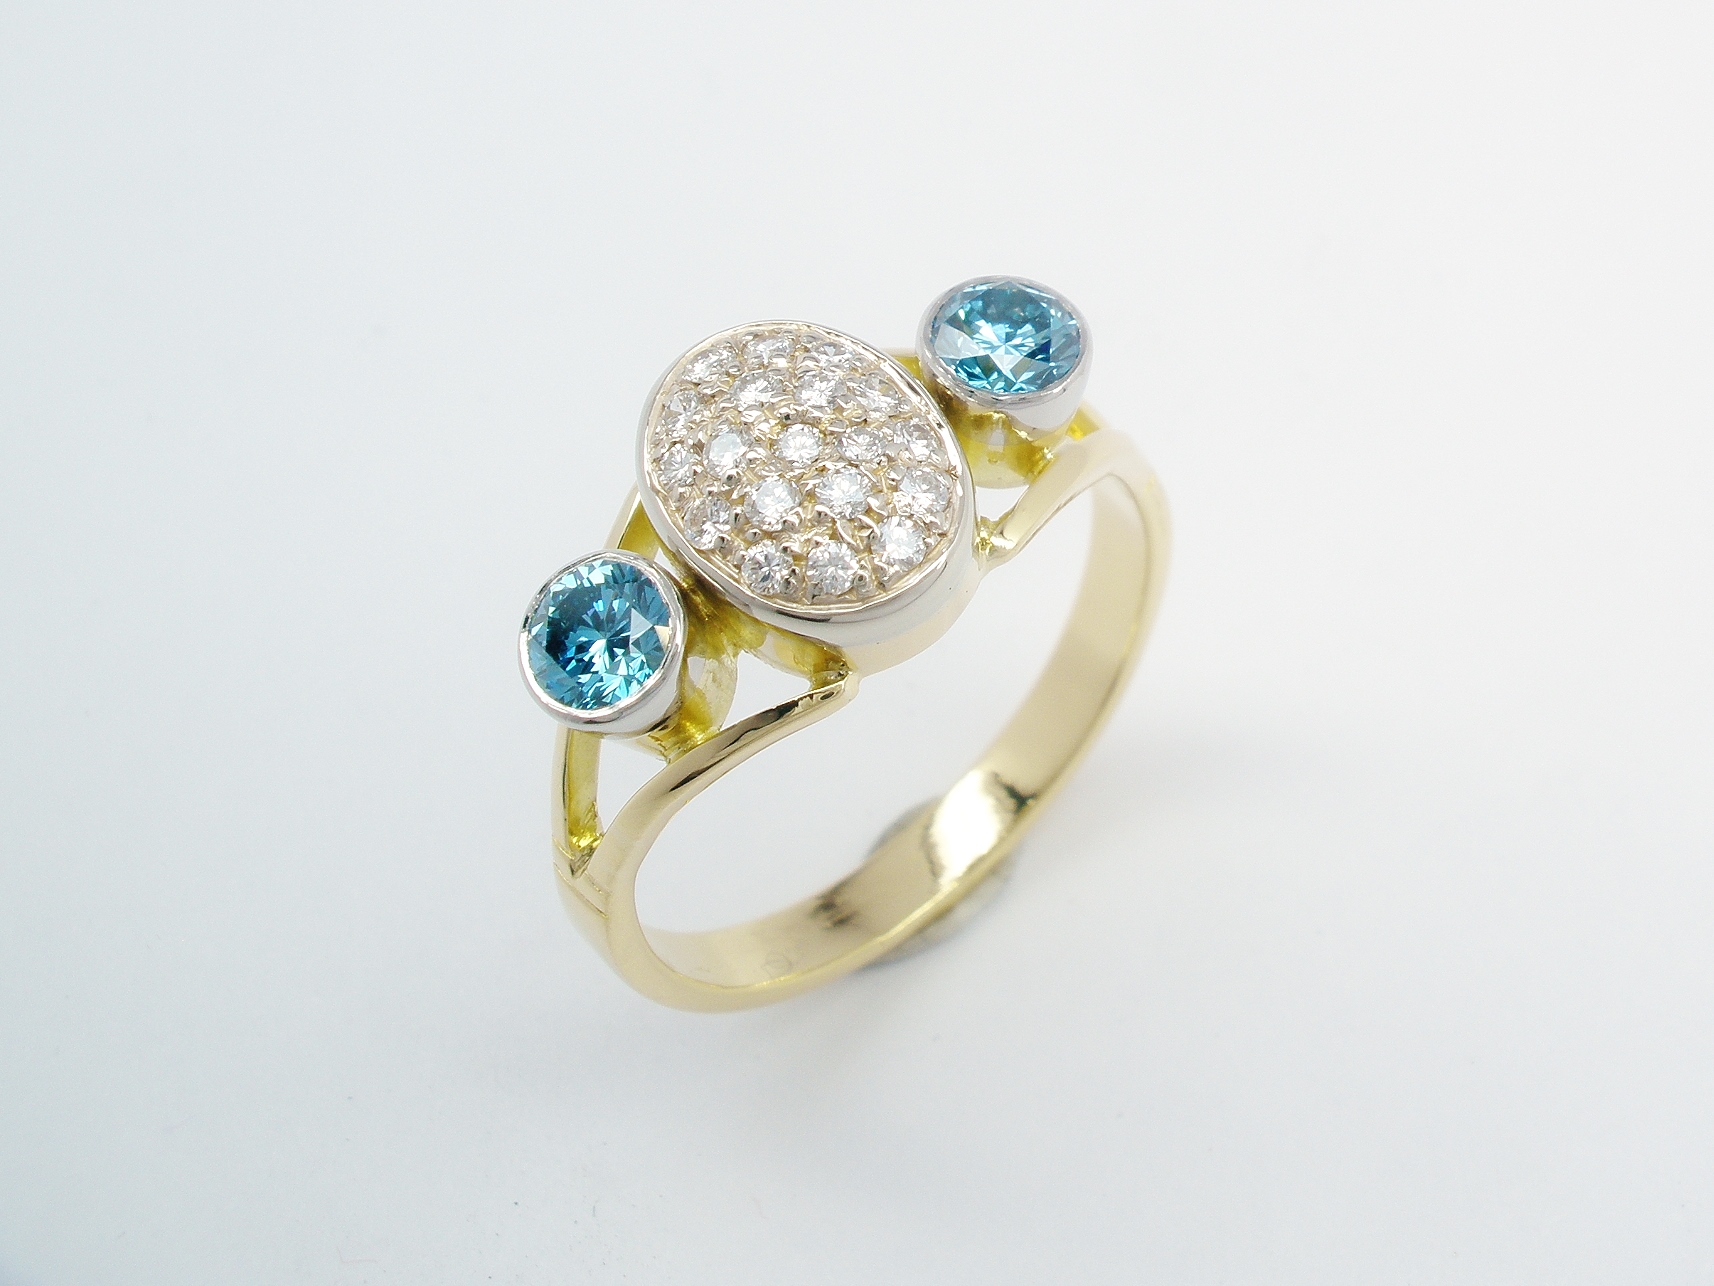 The oval cluster turned to go up the finger and flanked on either side with an HT-HP treated sky blue diamond rub over set in a platinum topped setting.